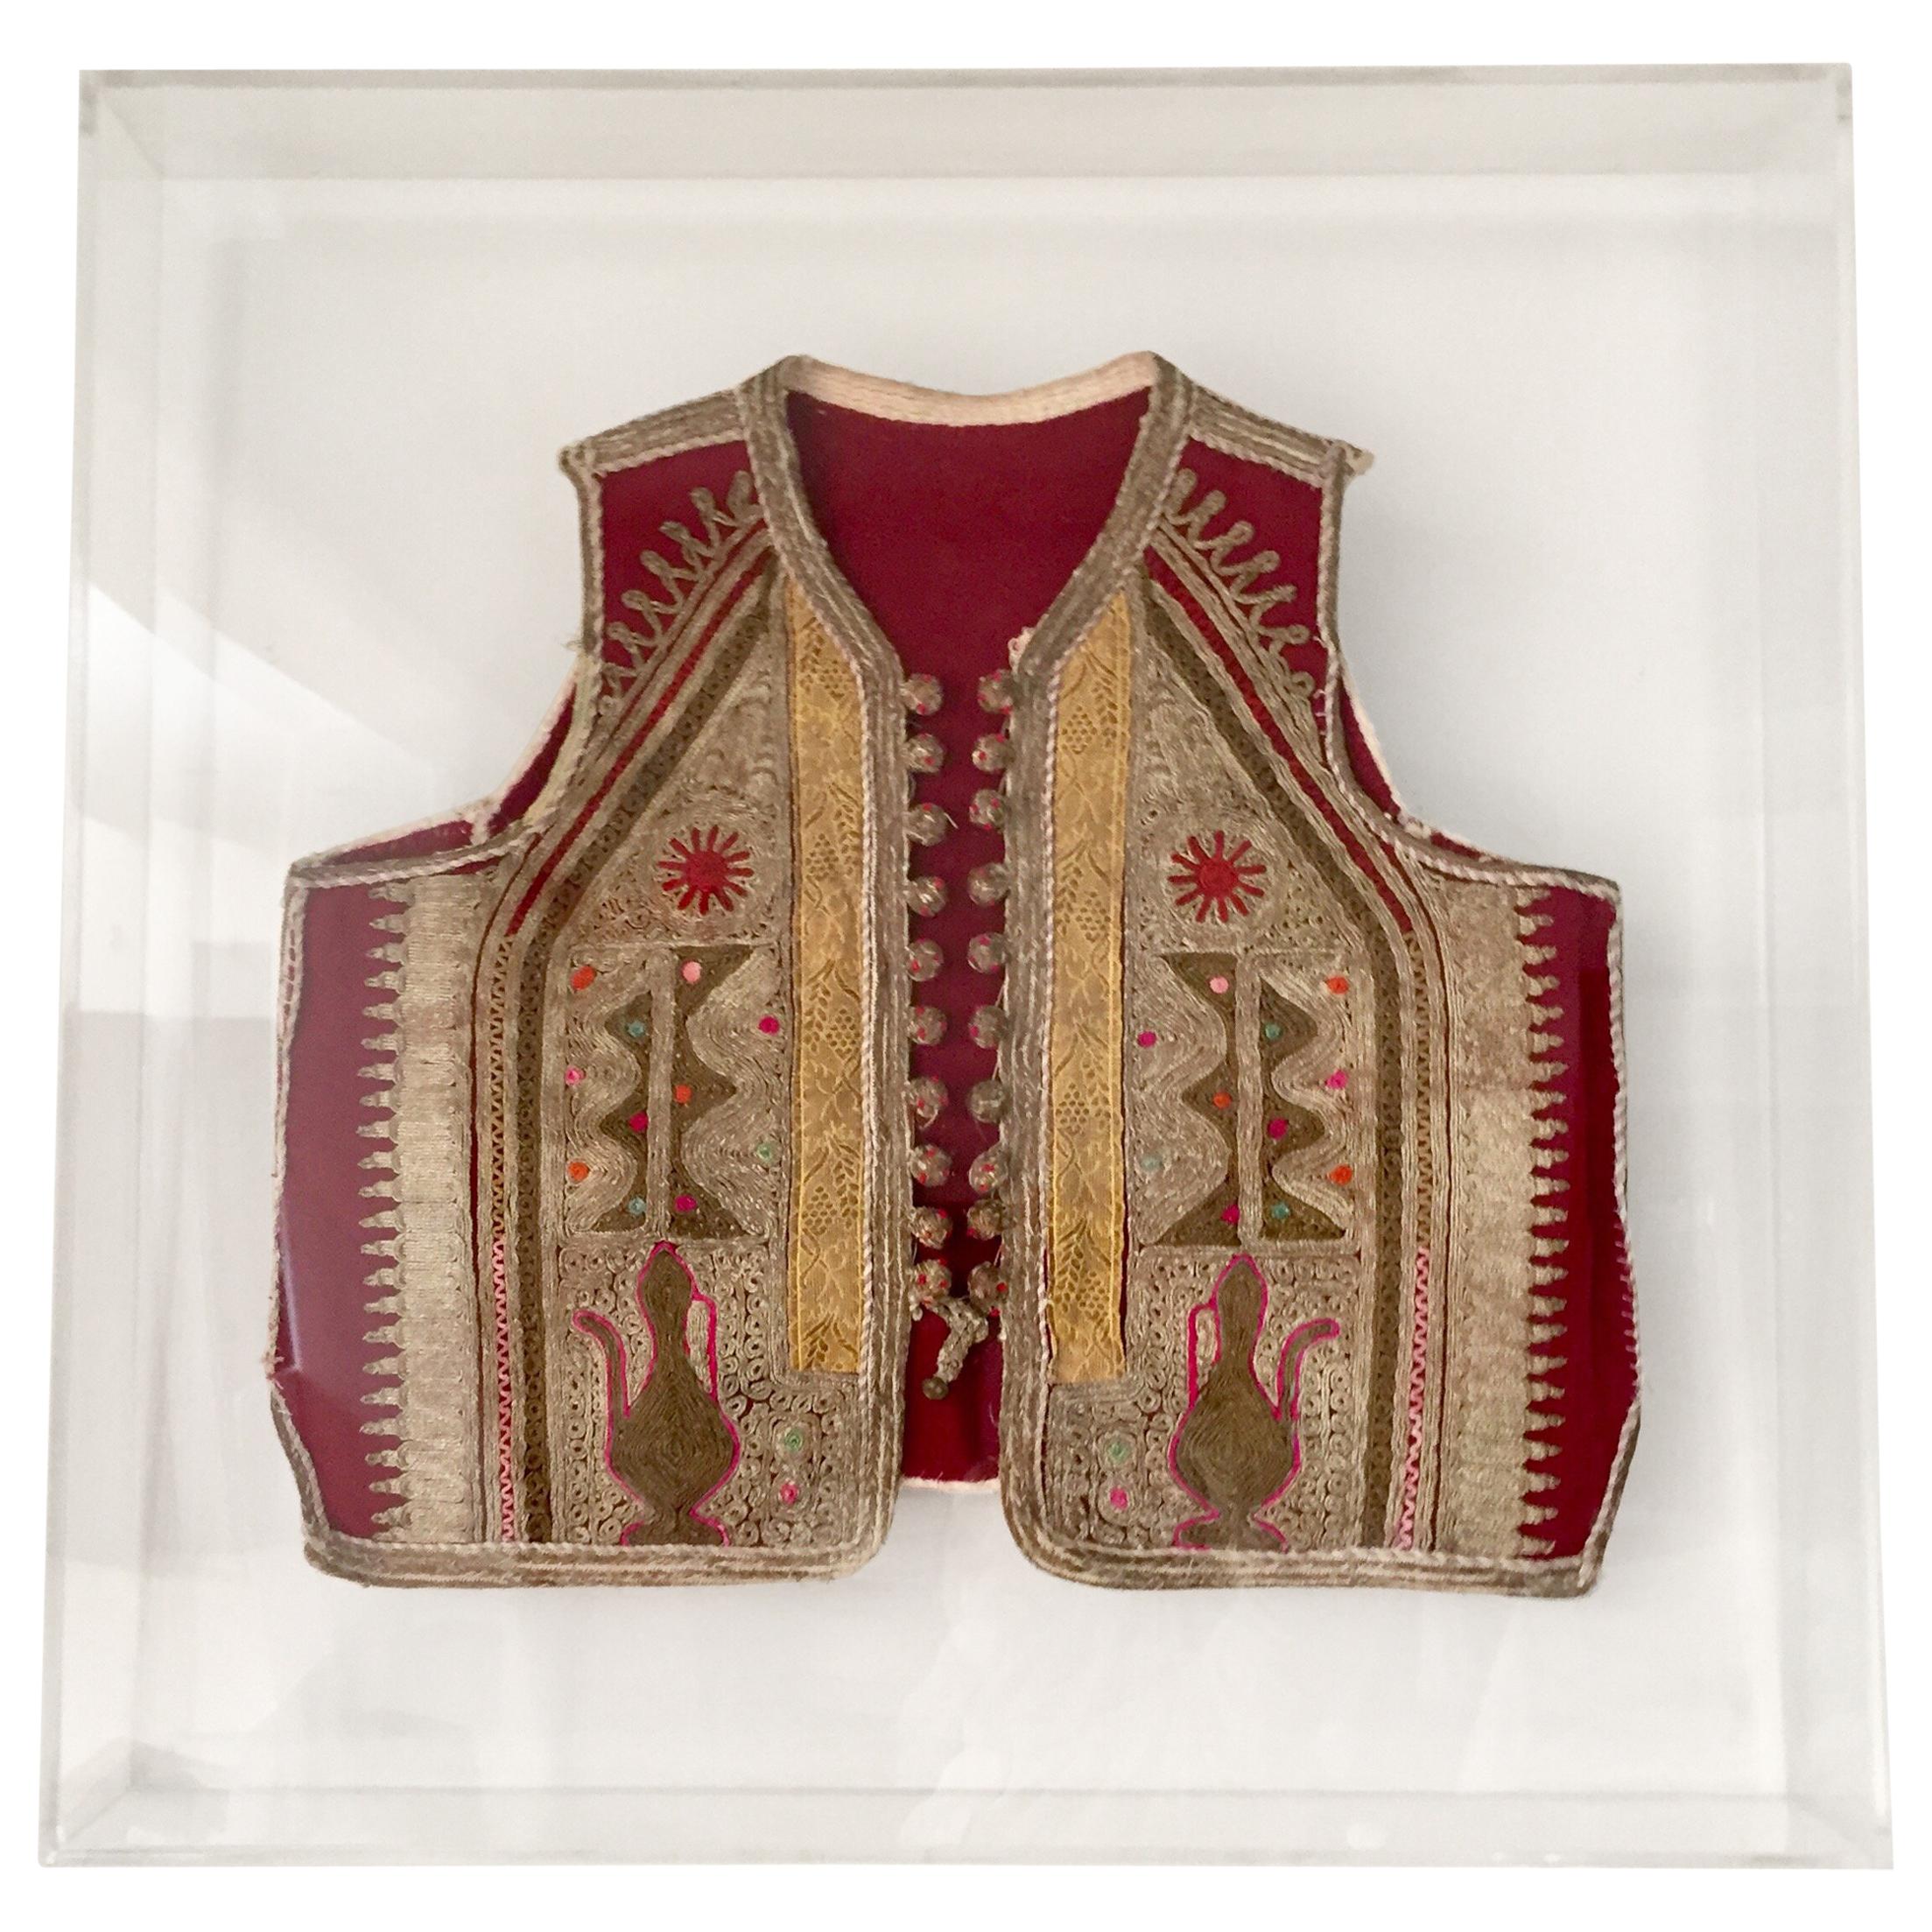 19th Century Antique Ottoman Embroidered Vest Framed in a Lucite Box